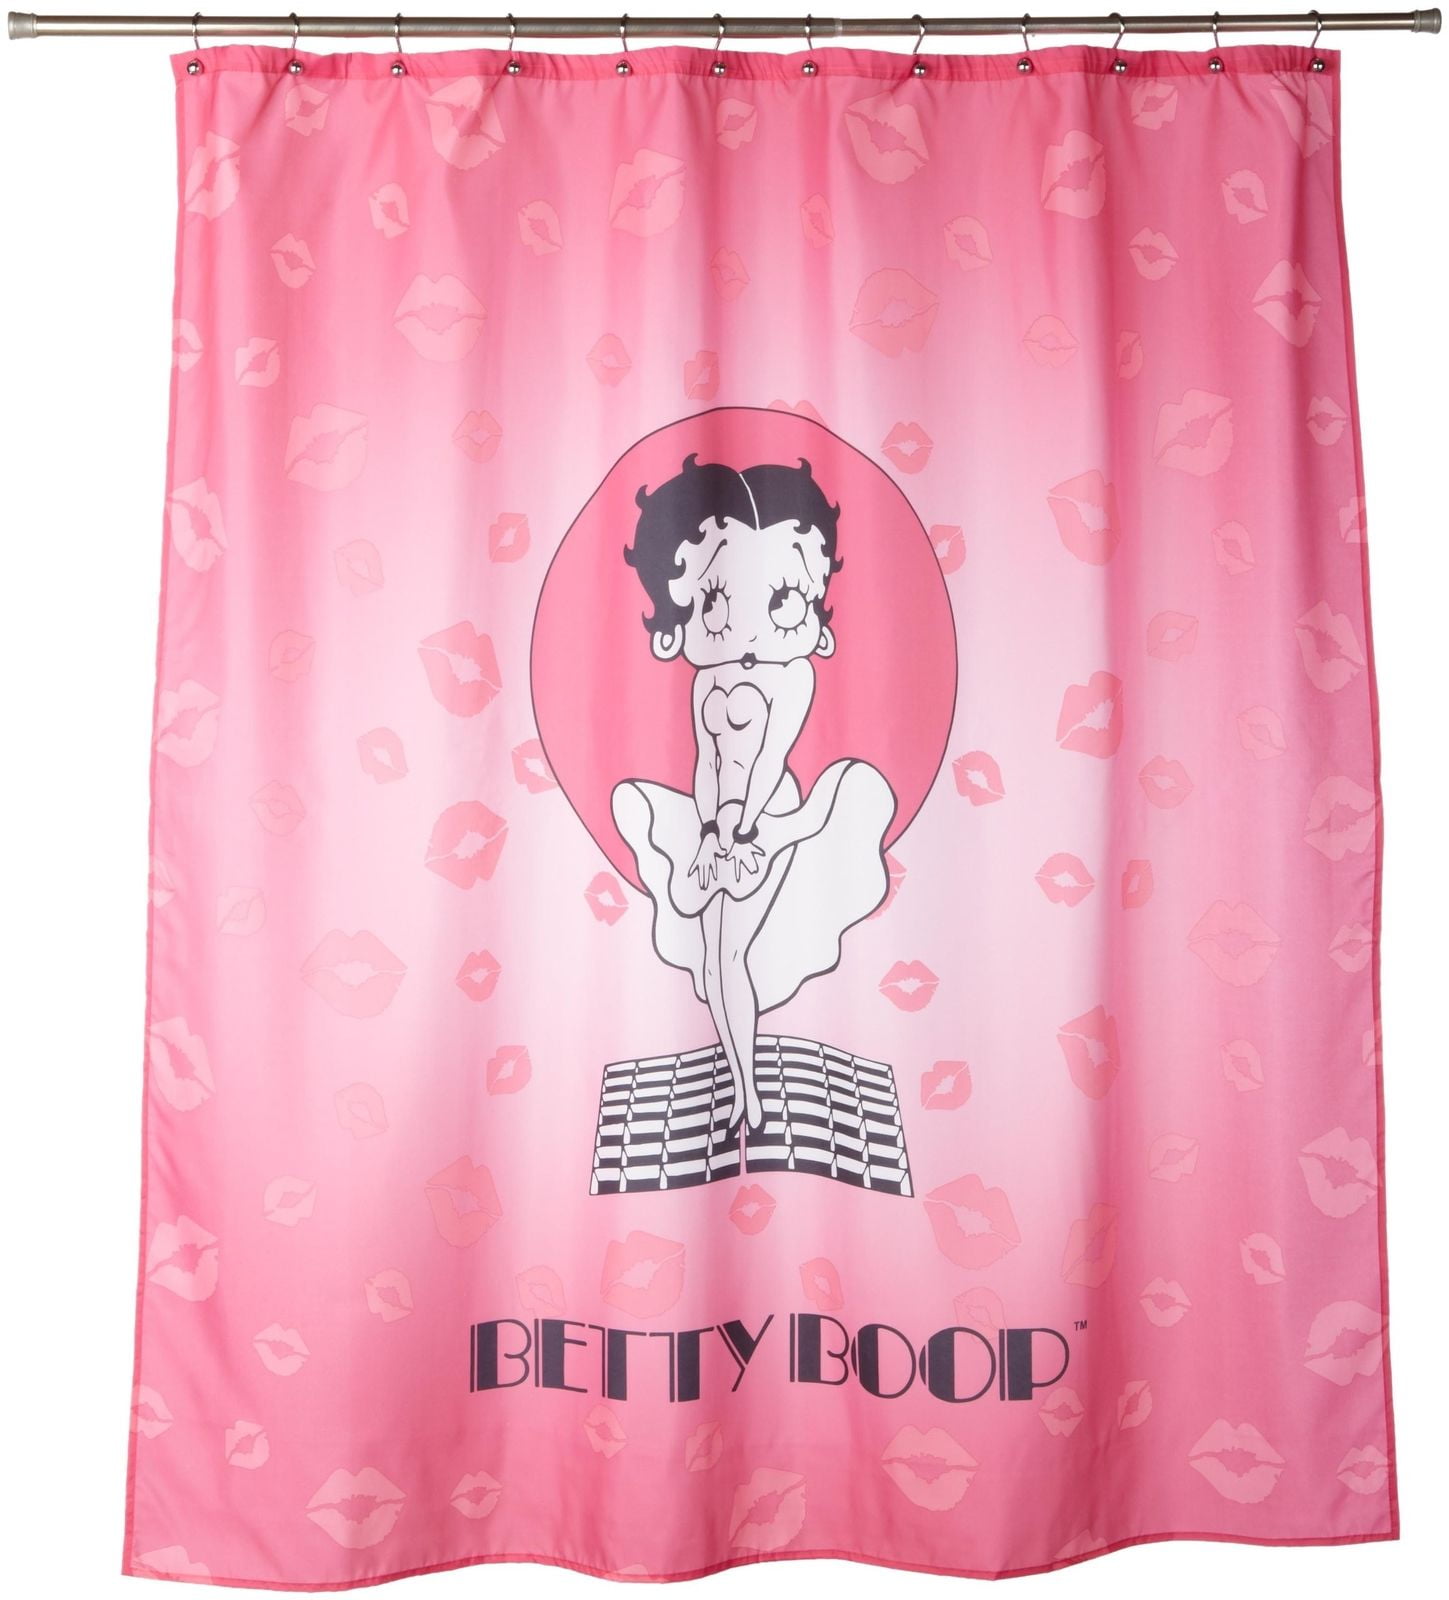 BETTY BOOP Have A Bath Waterproof Fabric Shower Curtain Bathroom With Curtain